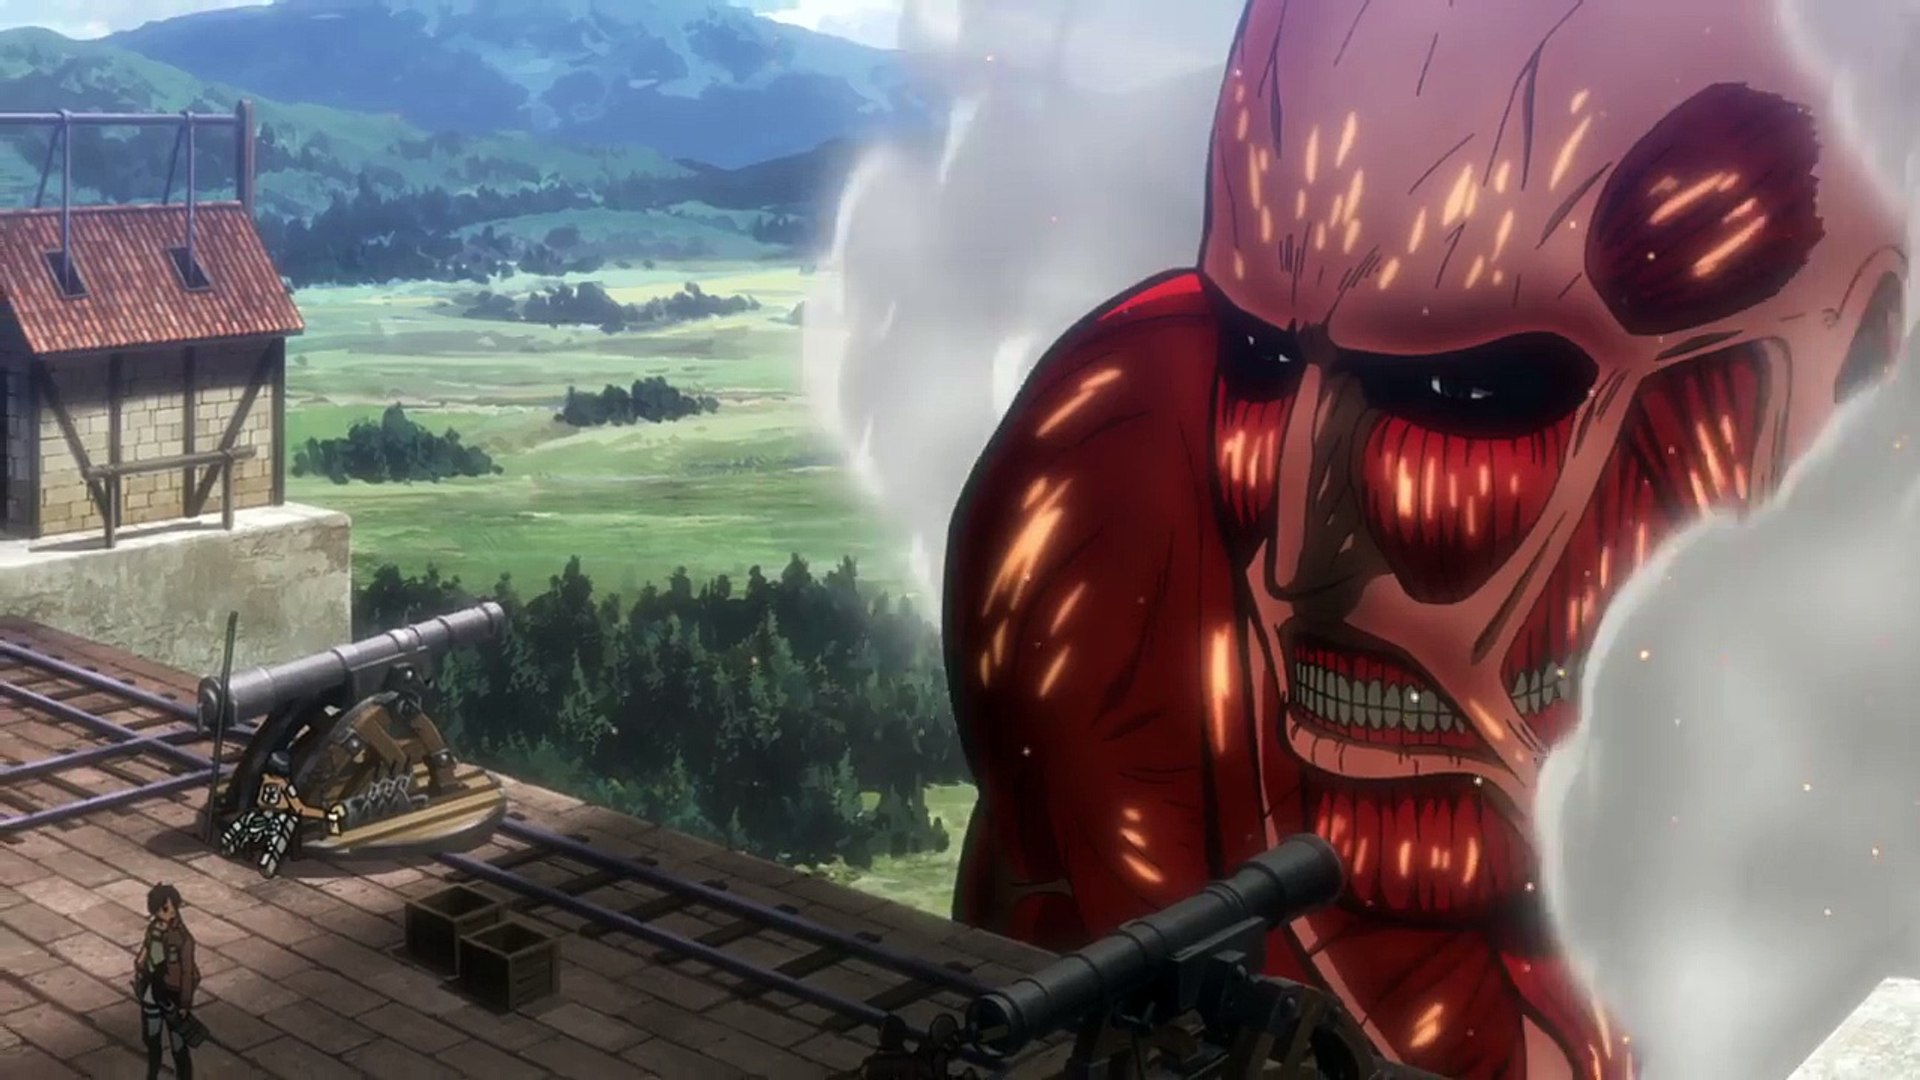 Attack On Titan In 9 Minutes